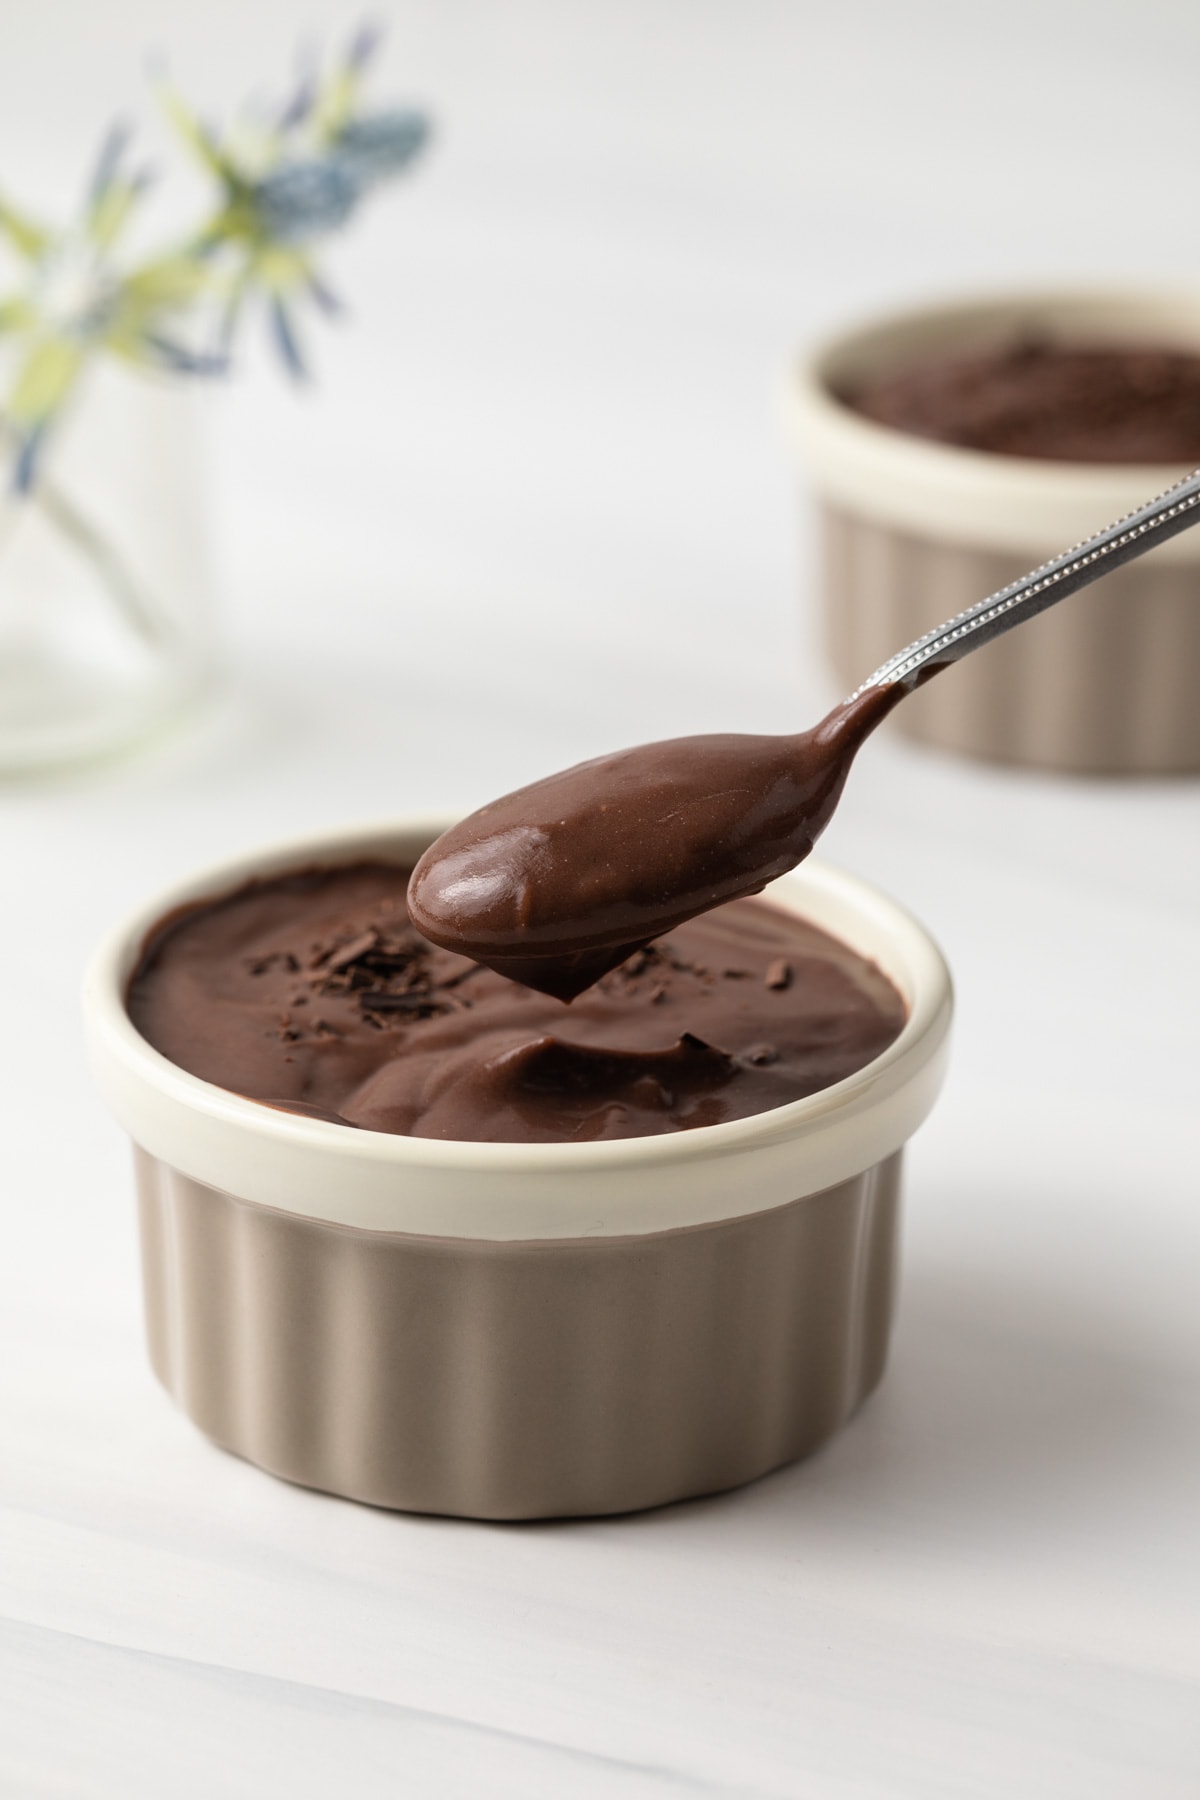 Chocolate pudding spooned out of a ramekin.